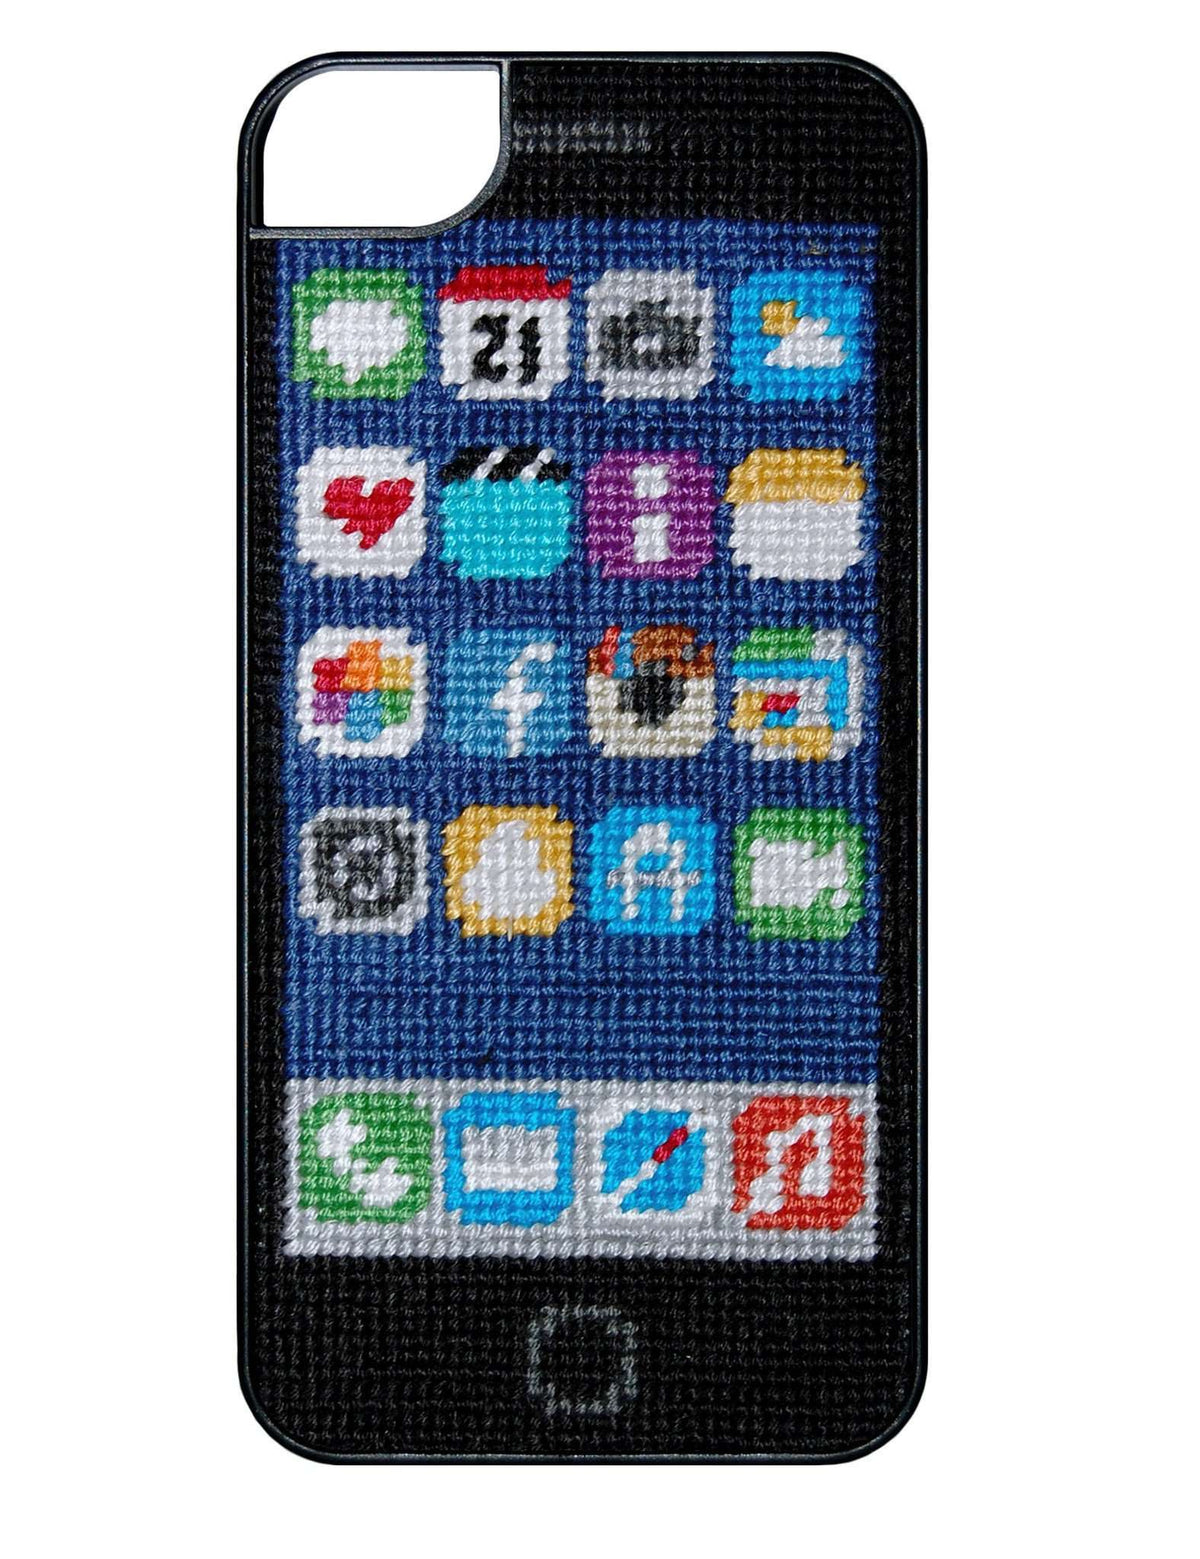 Screen Shot Needlepoint iPhone 6 Case by Smathers & Branson - Country Club Prep